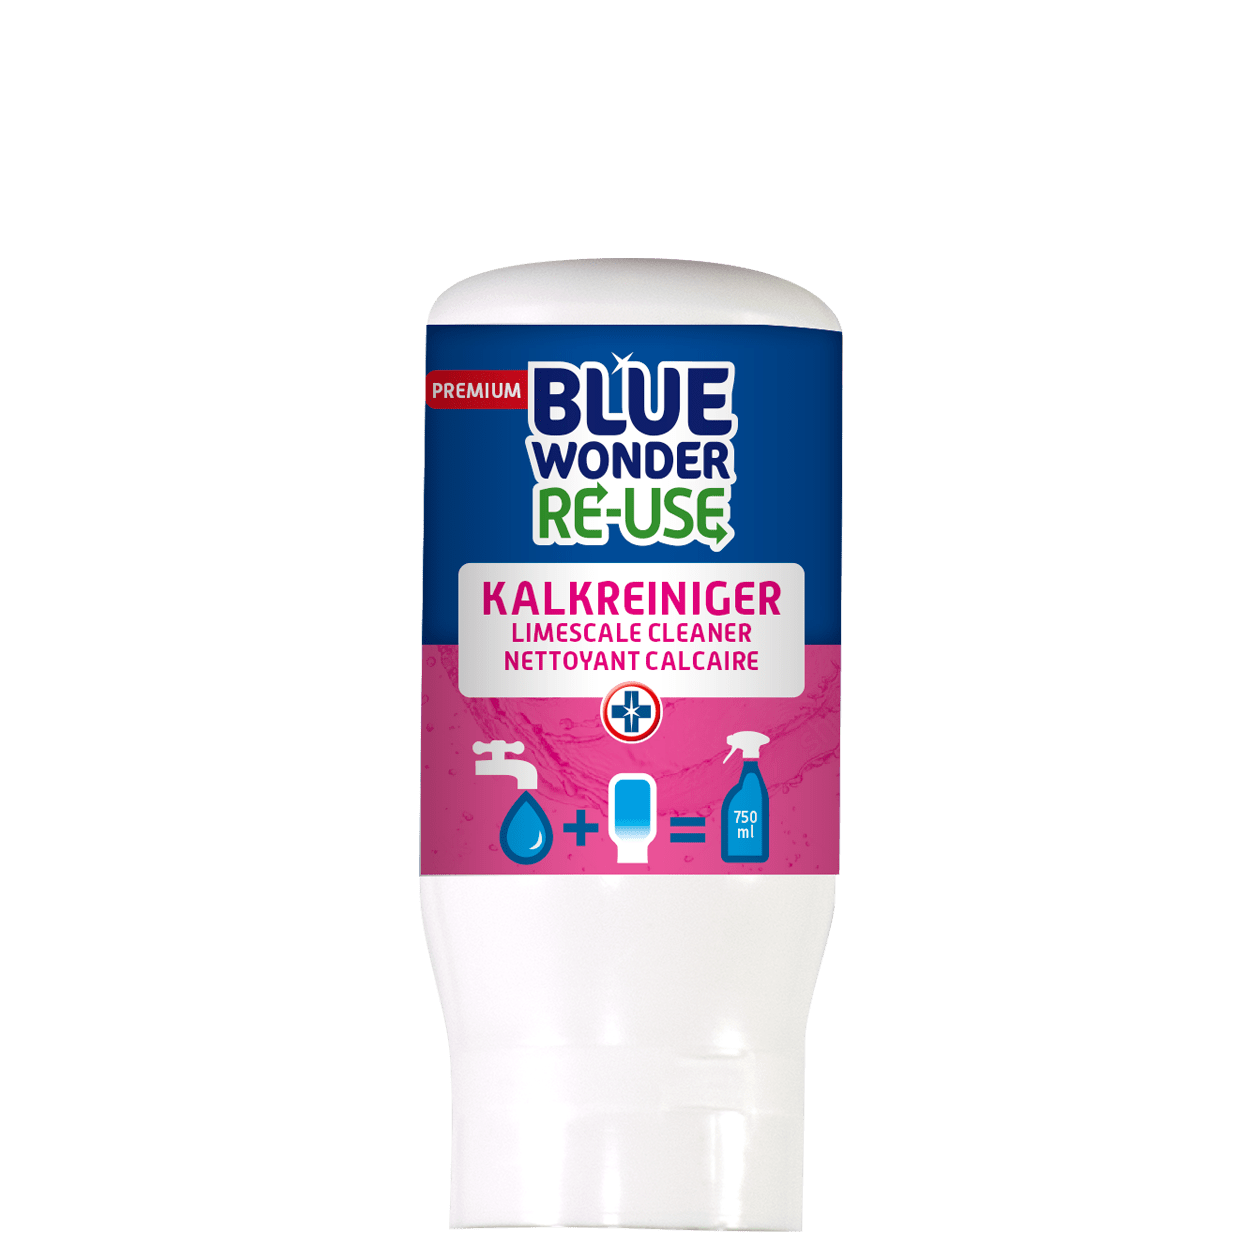 In response to the trend that consumers want less packaging material, Blue Wonder has developed the RE-USE capsule. The Blue Wonder RE-USE capsules contain the unique Blue Wonder products in concentrated form. For example, we reduce the amount of plastic bottles, trucks on the road and CO2 emissions by up to 20 times.

The RE-USE capsules are 100% recyclable and easy to use.
The RE-USE capsules are effective, safe, economical and good for your wallet.
Each RE-USE capsule is suitable for refilling a 750ml bottle of Blue Wonder.
TNo unnecessary transport of water, no carrying heavy bottles home.